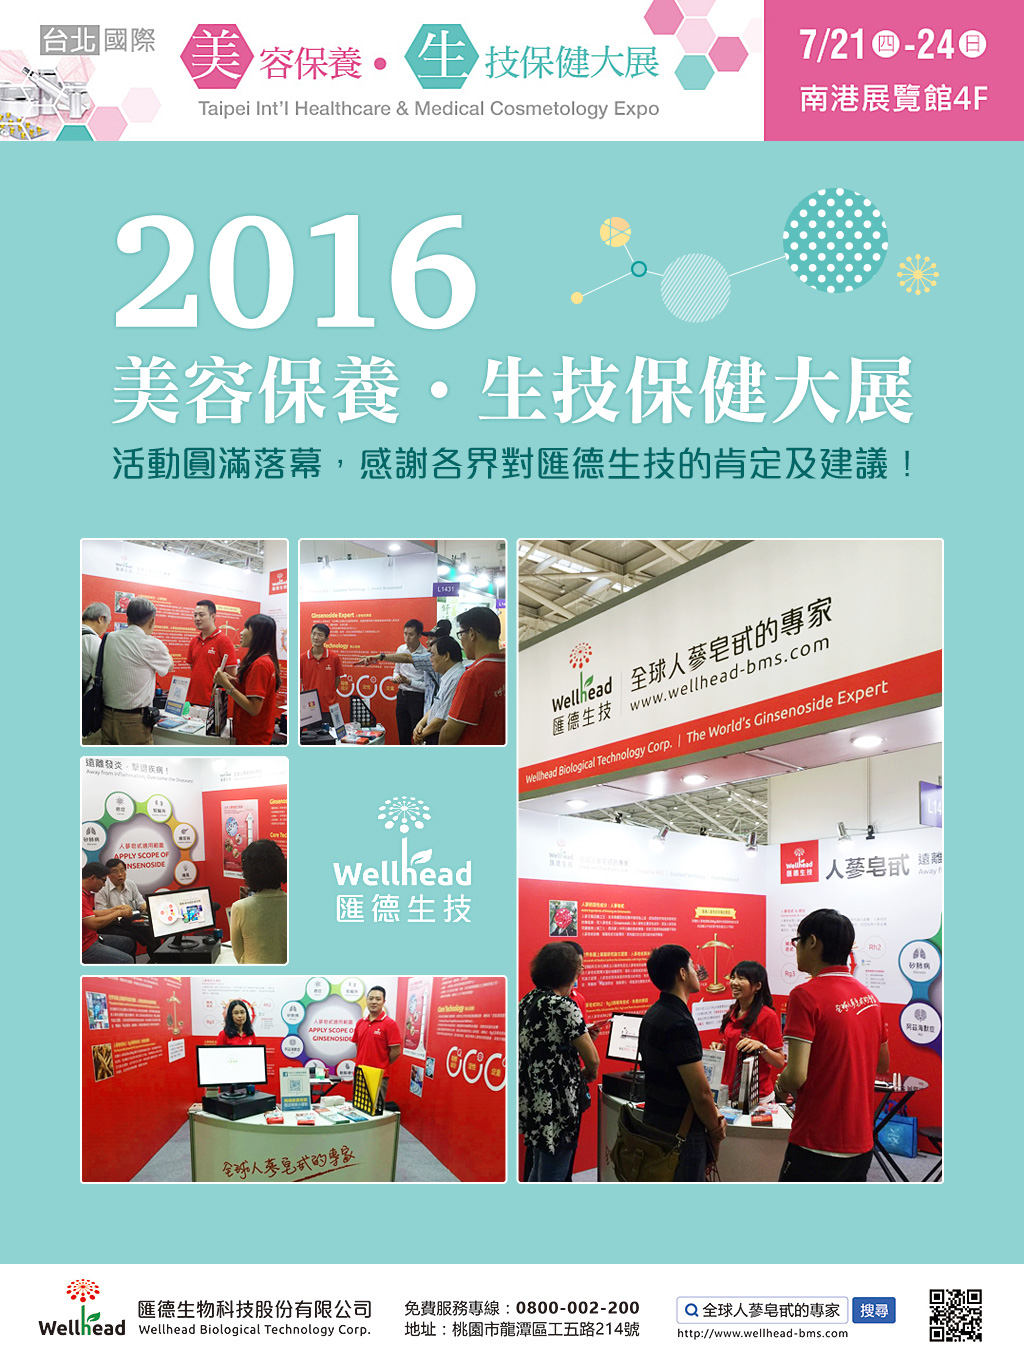 [ 2016 BioTaiwan Exhibition ] The event was a complete success, wonderful review